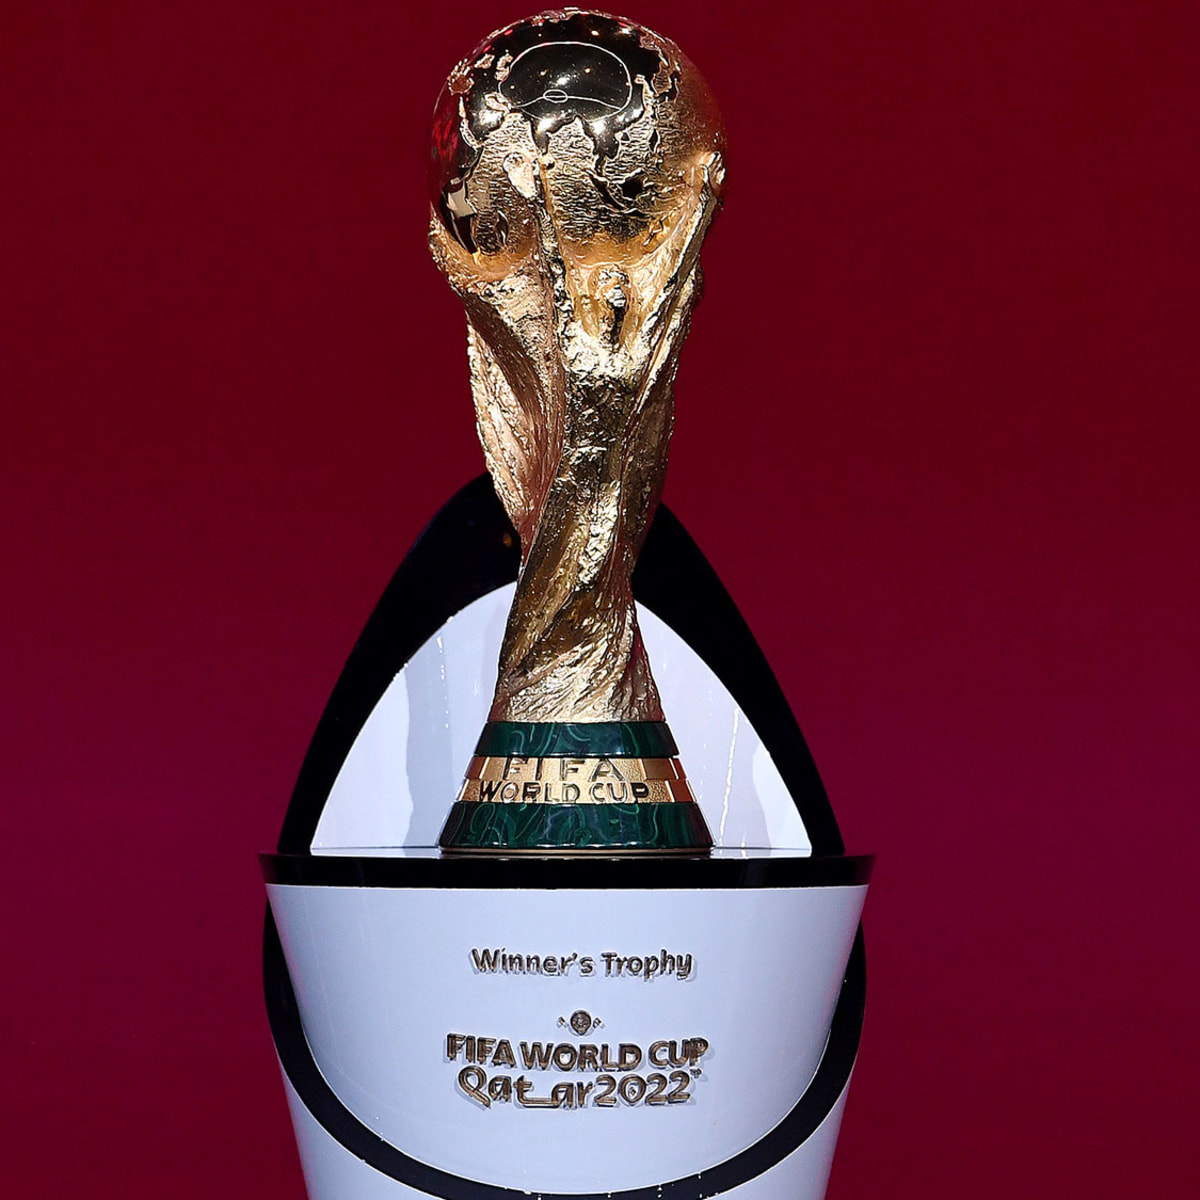 Qatar world cup tickets sales launched at reduced prices